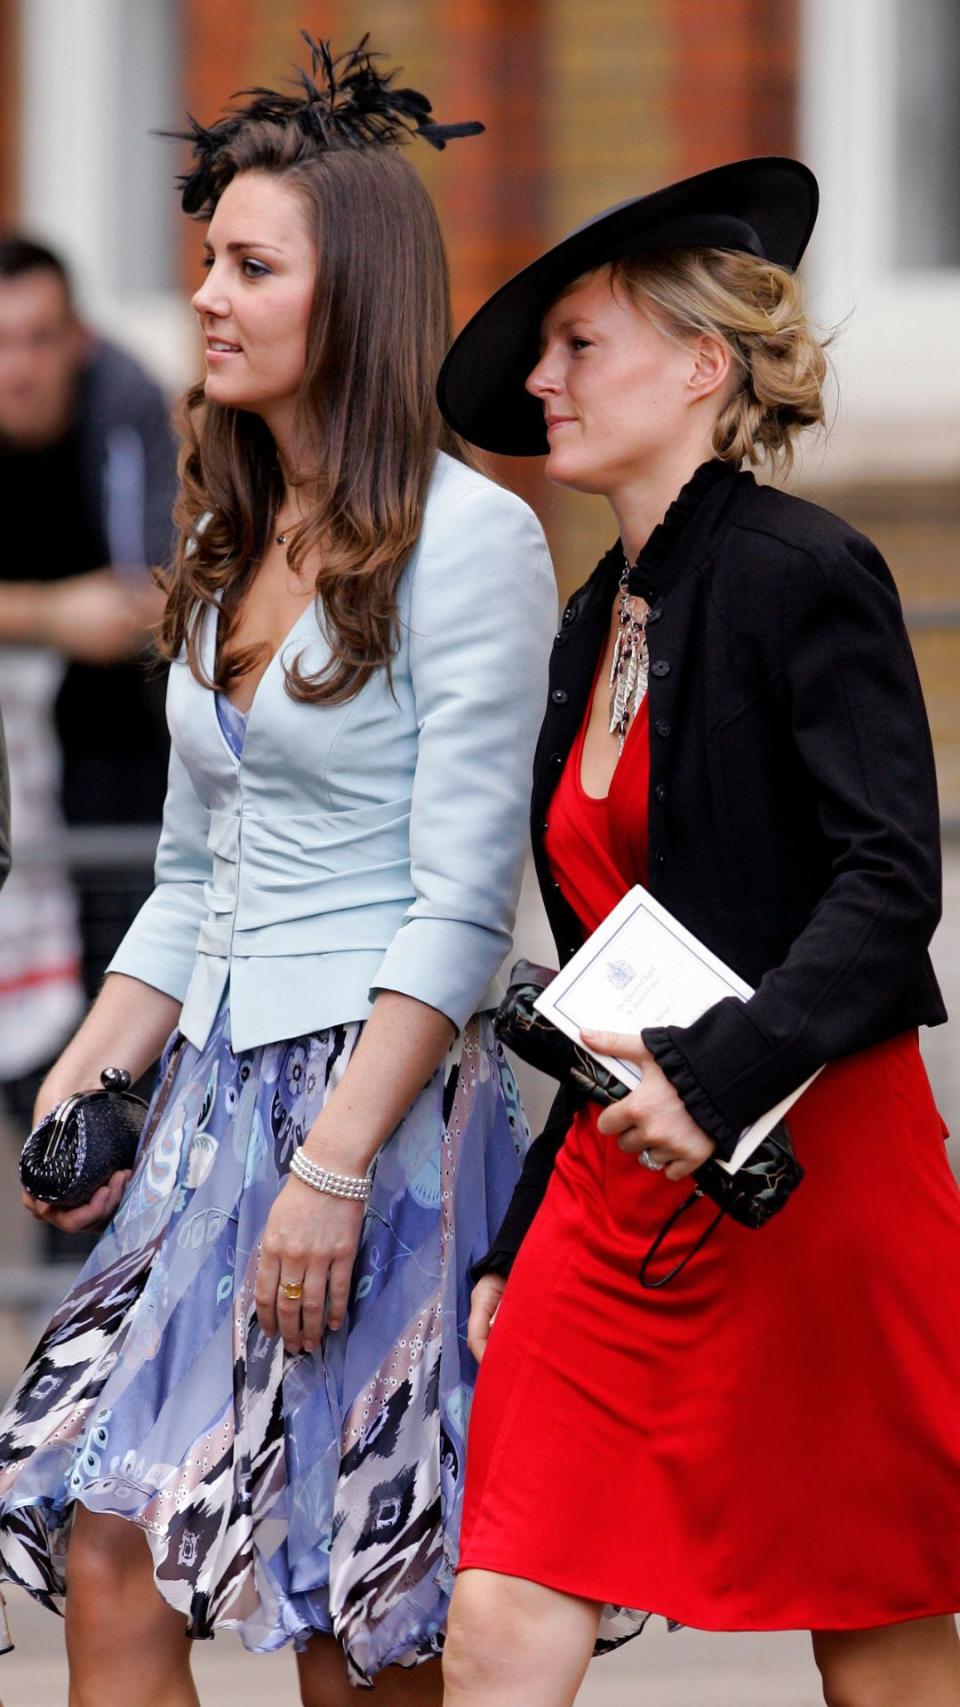 <p> Deciding what to wear to a wedding always seems to be one of the most stressful outfit choices. But when Kate Middleton attended the wedding of Lady Rose Windsor and George Gilman in 2008, she walked in looking effortlessly put together.&#xA0; </p> <p> Pairing her flowing patterned dress with a reserved cropped blazer, the soon-to-be Duchess toned down the bright pattern dominating her look with pastel tones and minimal jewelry, showing everyone just how to dress as a wedding guest. </p>